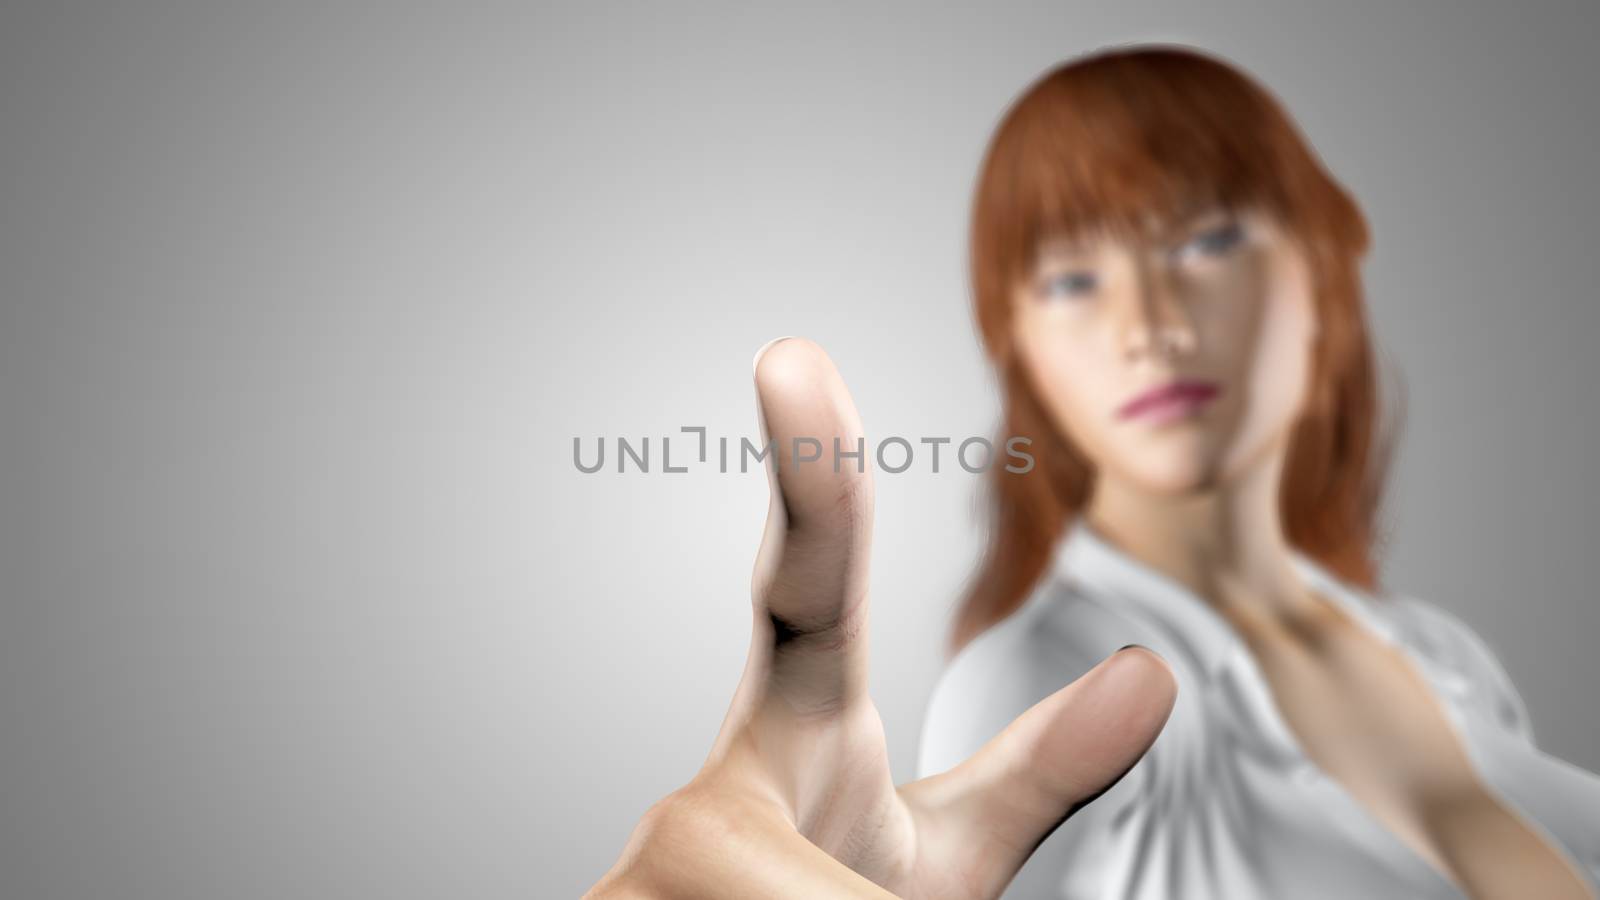 Sexy business woman touching a virtual screen. Free blank space available. The woman is blurred behind the transparent screen to focus on the finger and what it points. 3D render.